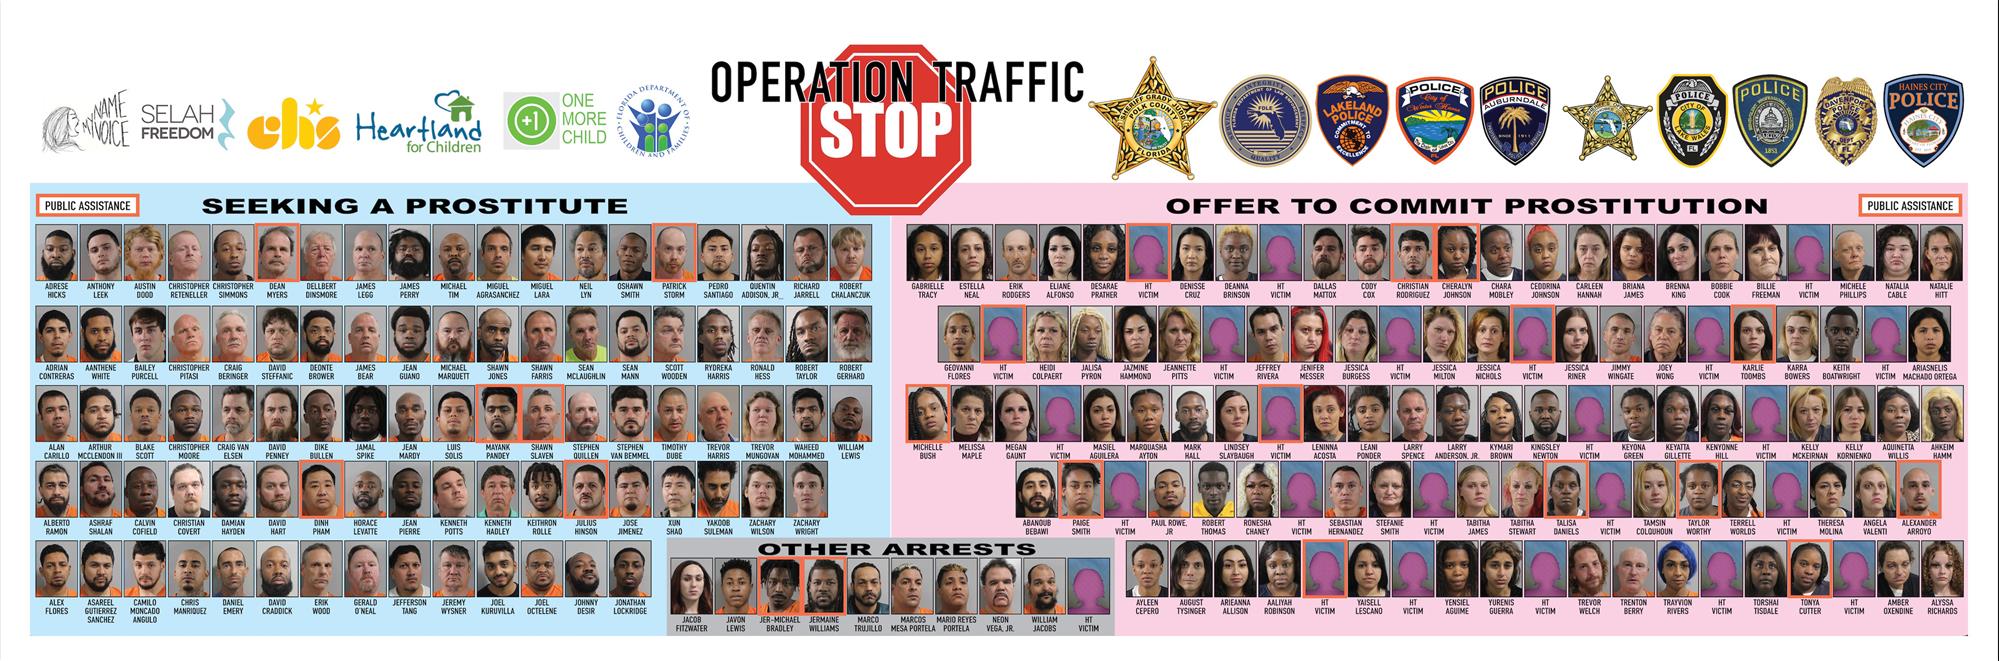 Operation Traffic Stop poster